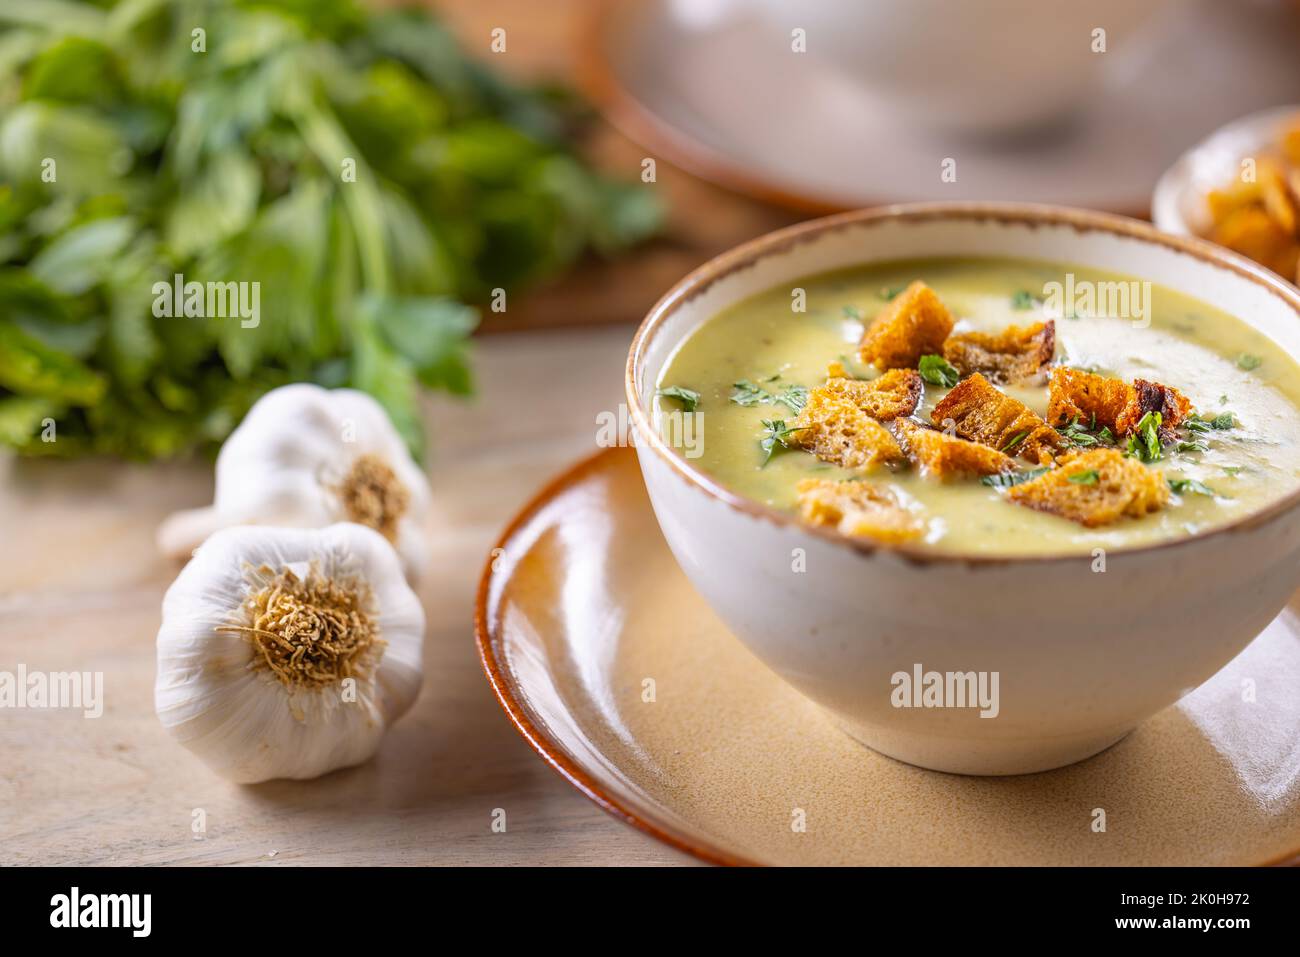 Garlic cream soup with bread croutons and flavored with copped celery leaves. Stock Photo